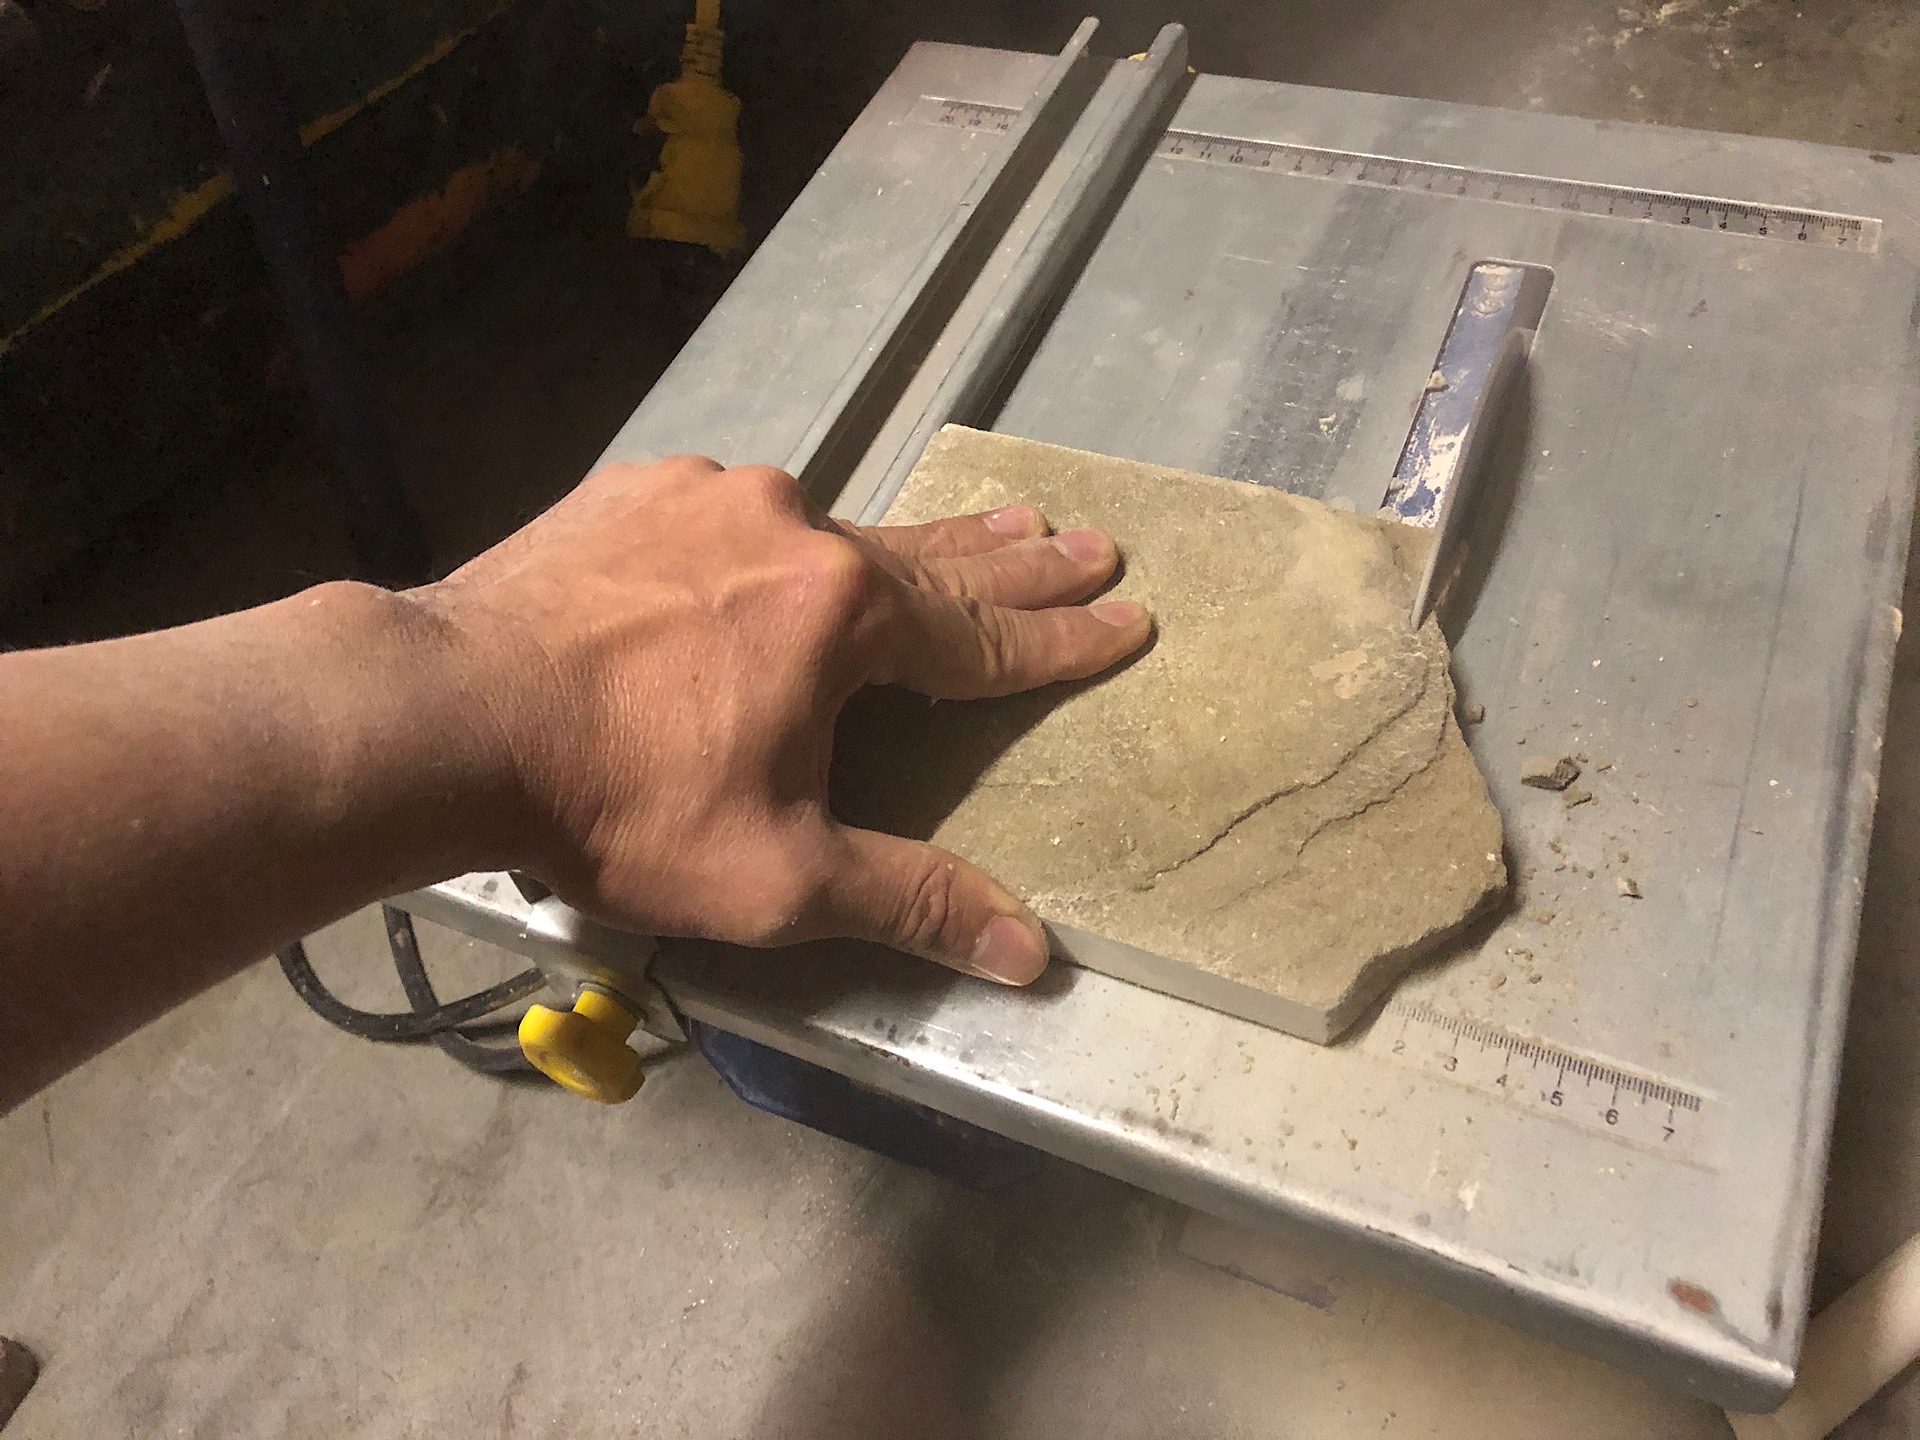 Cutting sandstone with a tile saw